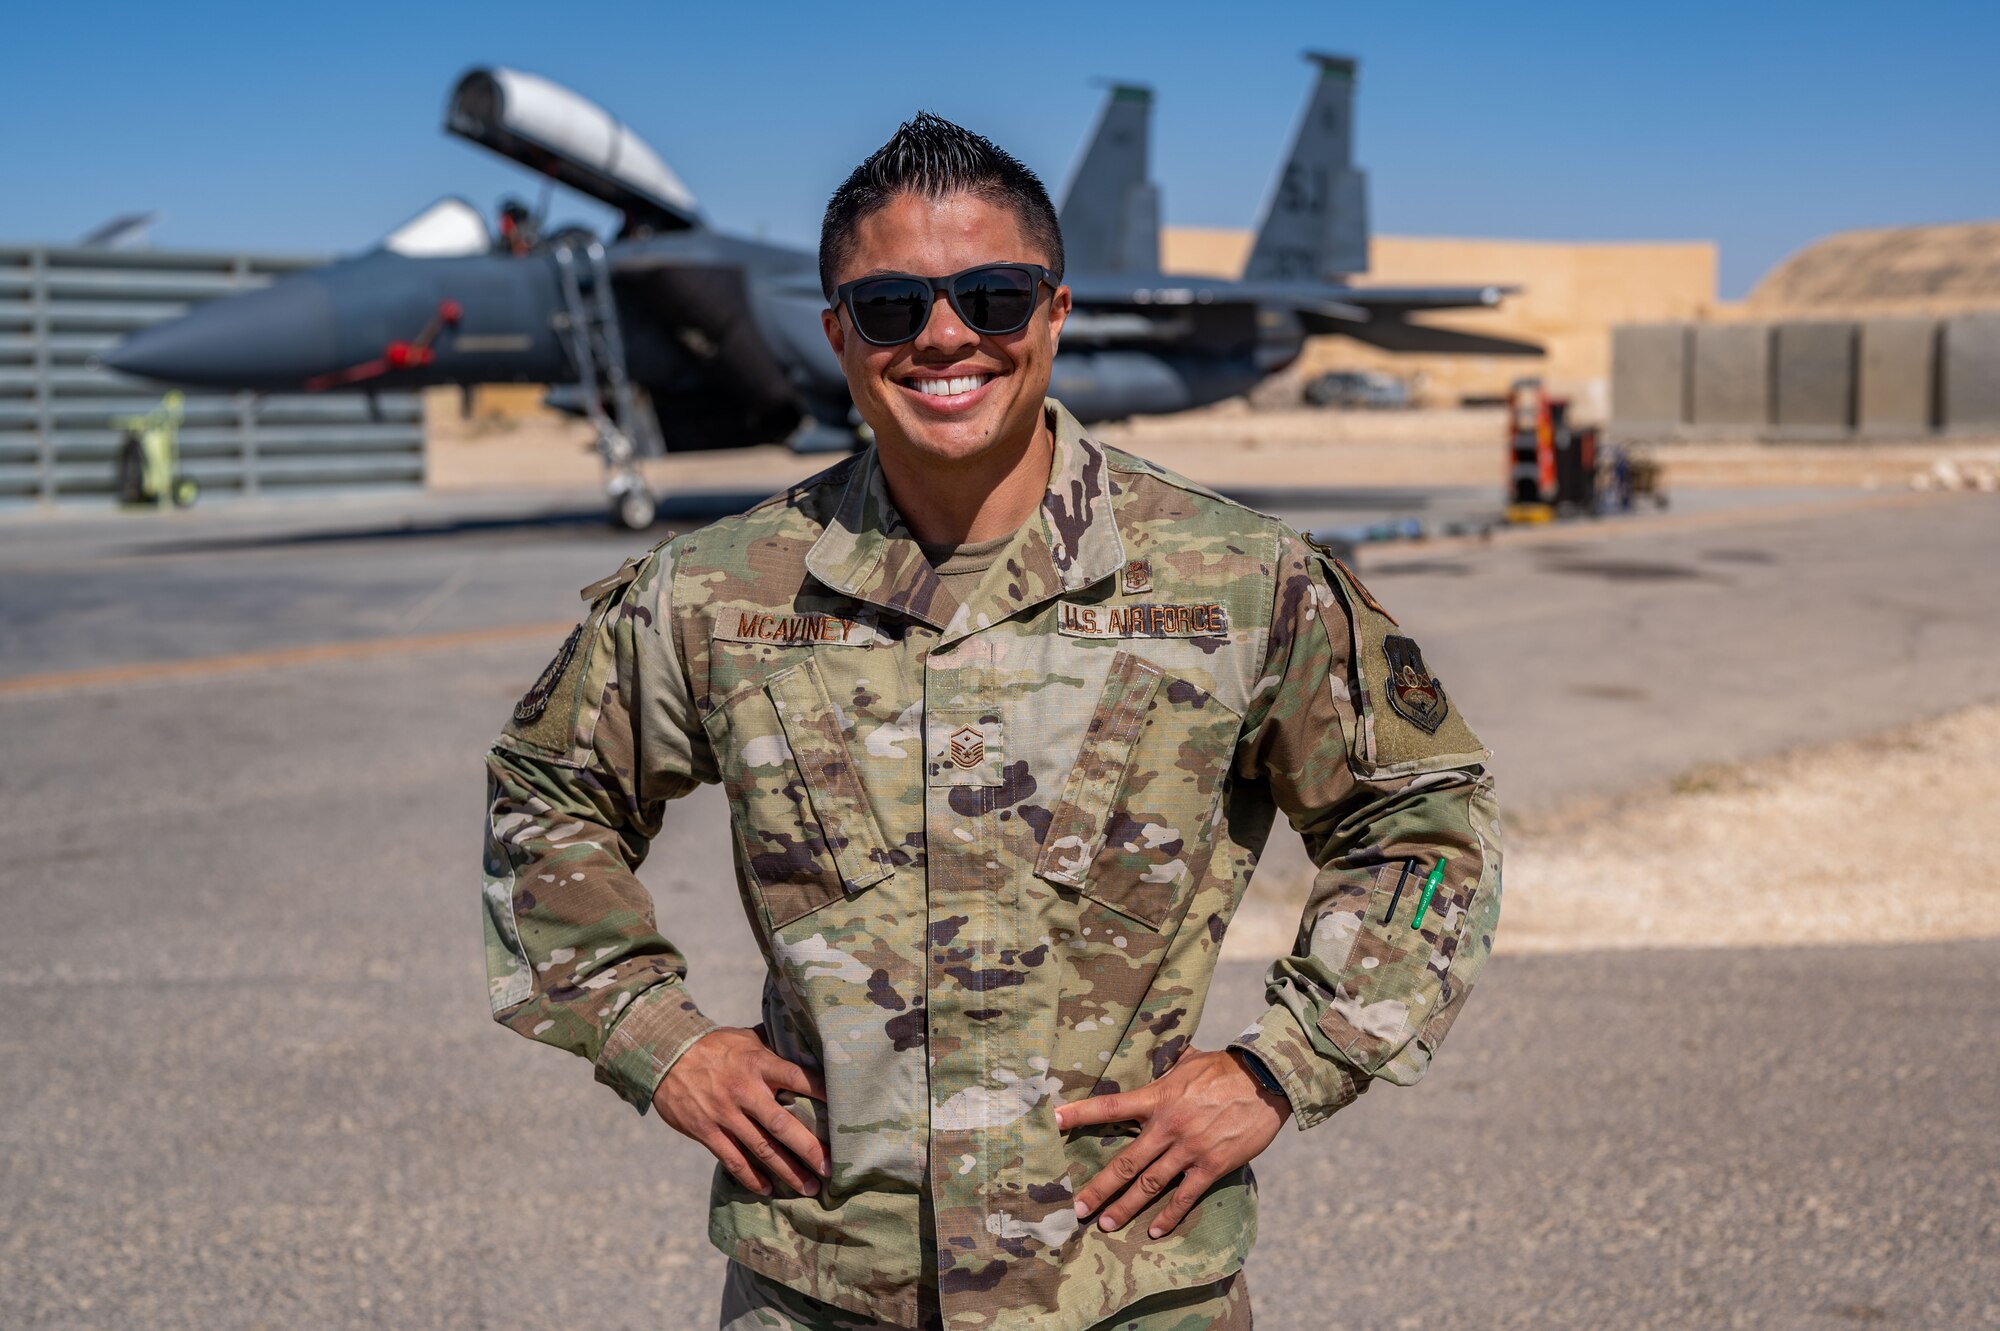 Master Sgt. Kayleigh McAviney, 335th Fighter Generation Squadron first sergeant, poses in front of an F-15E Strike Eagle assigned to Seymour Johnson Air Force Base, North Carolina, while at her deployed location in Southwest Asia June 20, 2022. This is her seventh deployment, and she and her wife have faced many challenges together, having never been together for longer than nine consecutive months throughout their entire relationship. (U.S. Air Force photo by Master Sgt. Kelly Goonan)